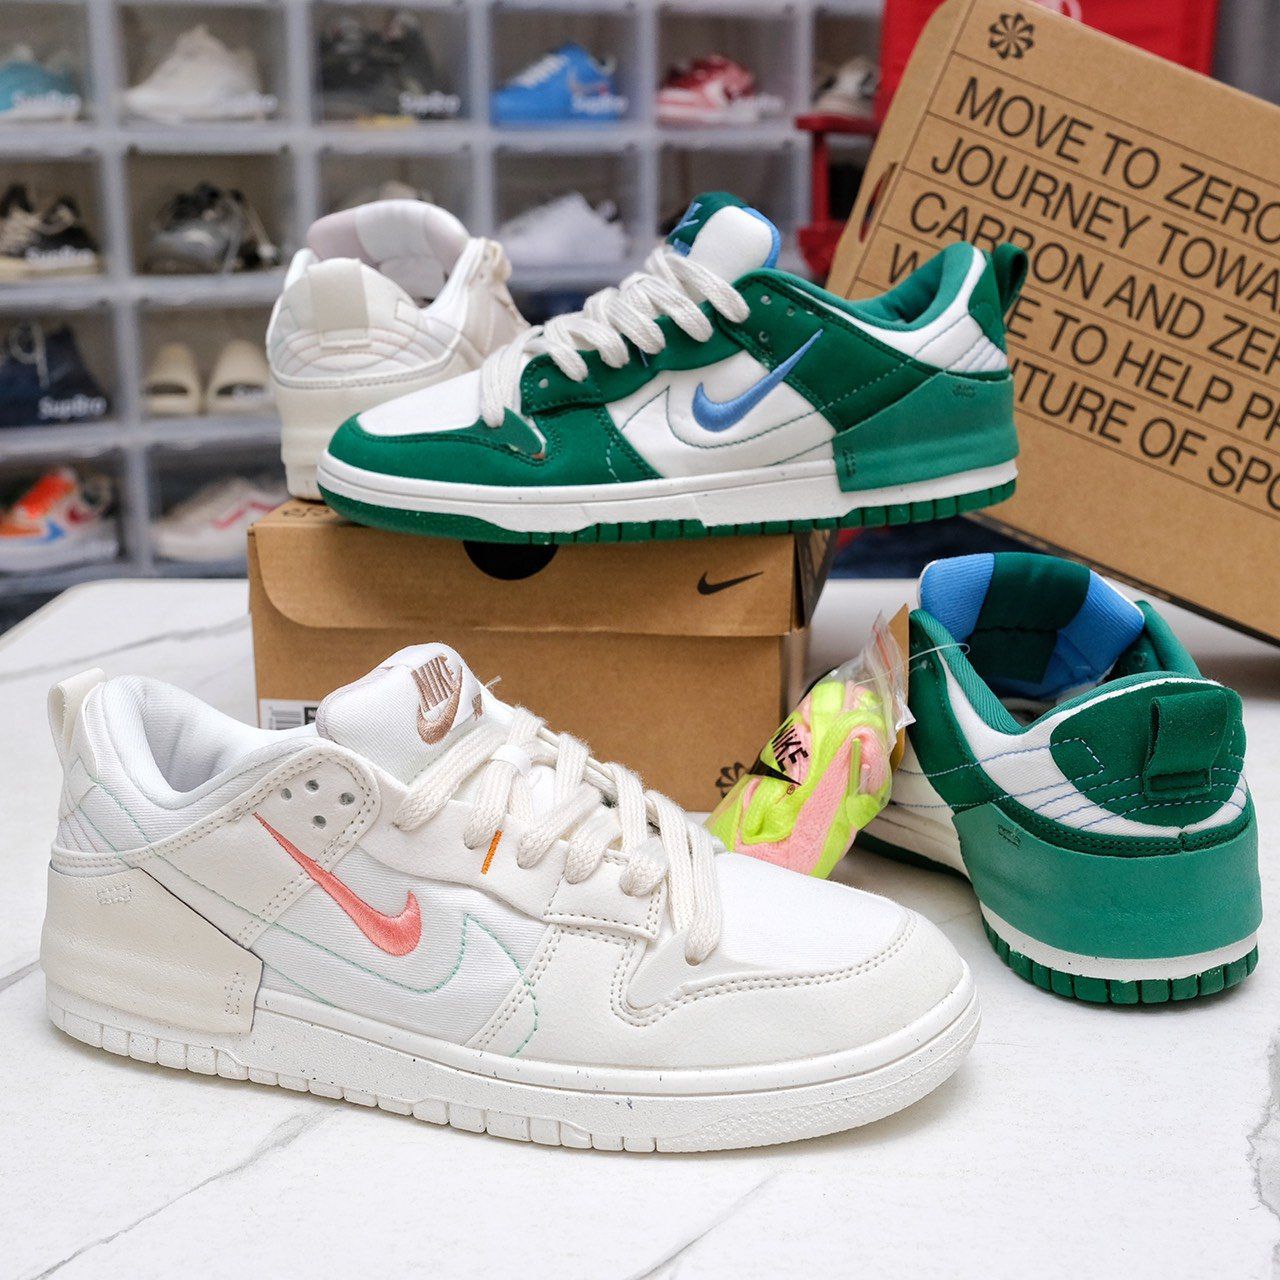 Giày Nike Dunk Disrupt Trắng 2 Pale Ivory rep 1:1 Like Auth